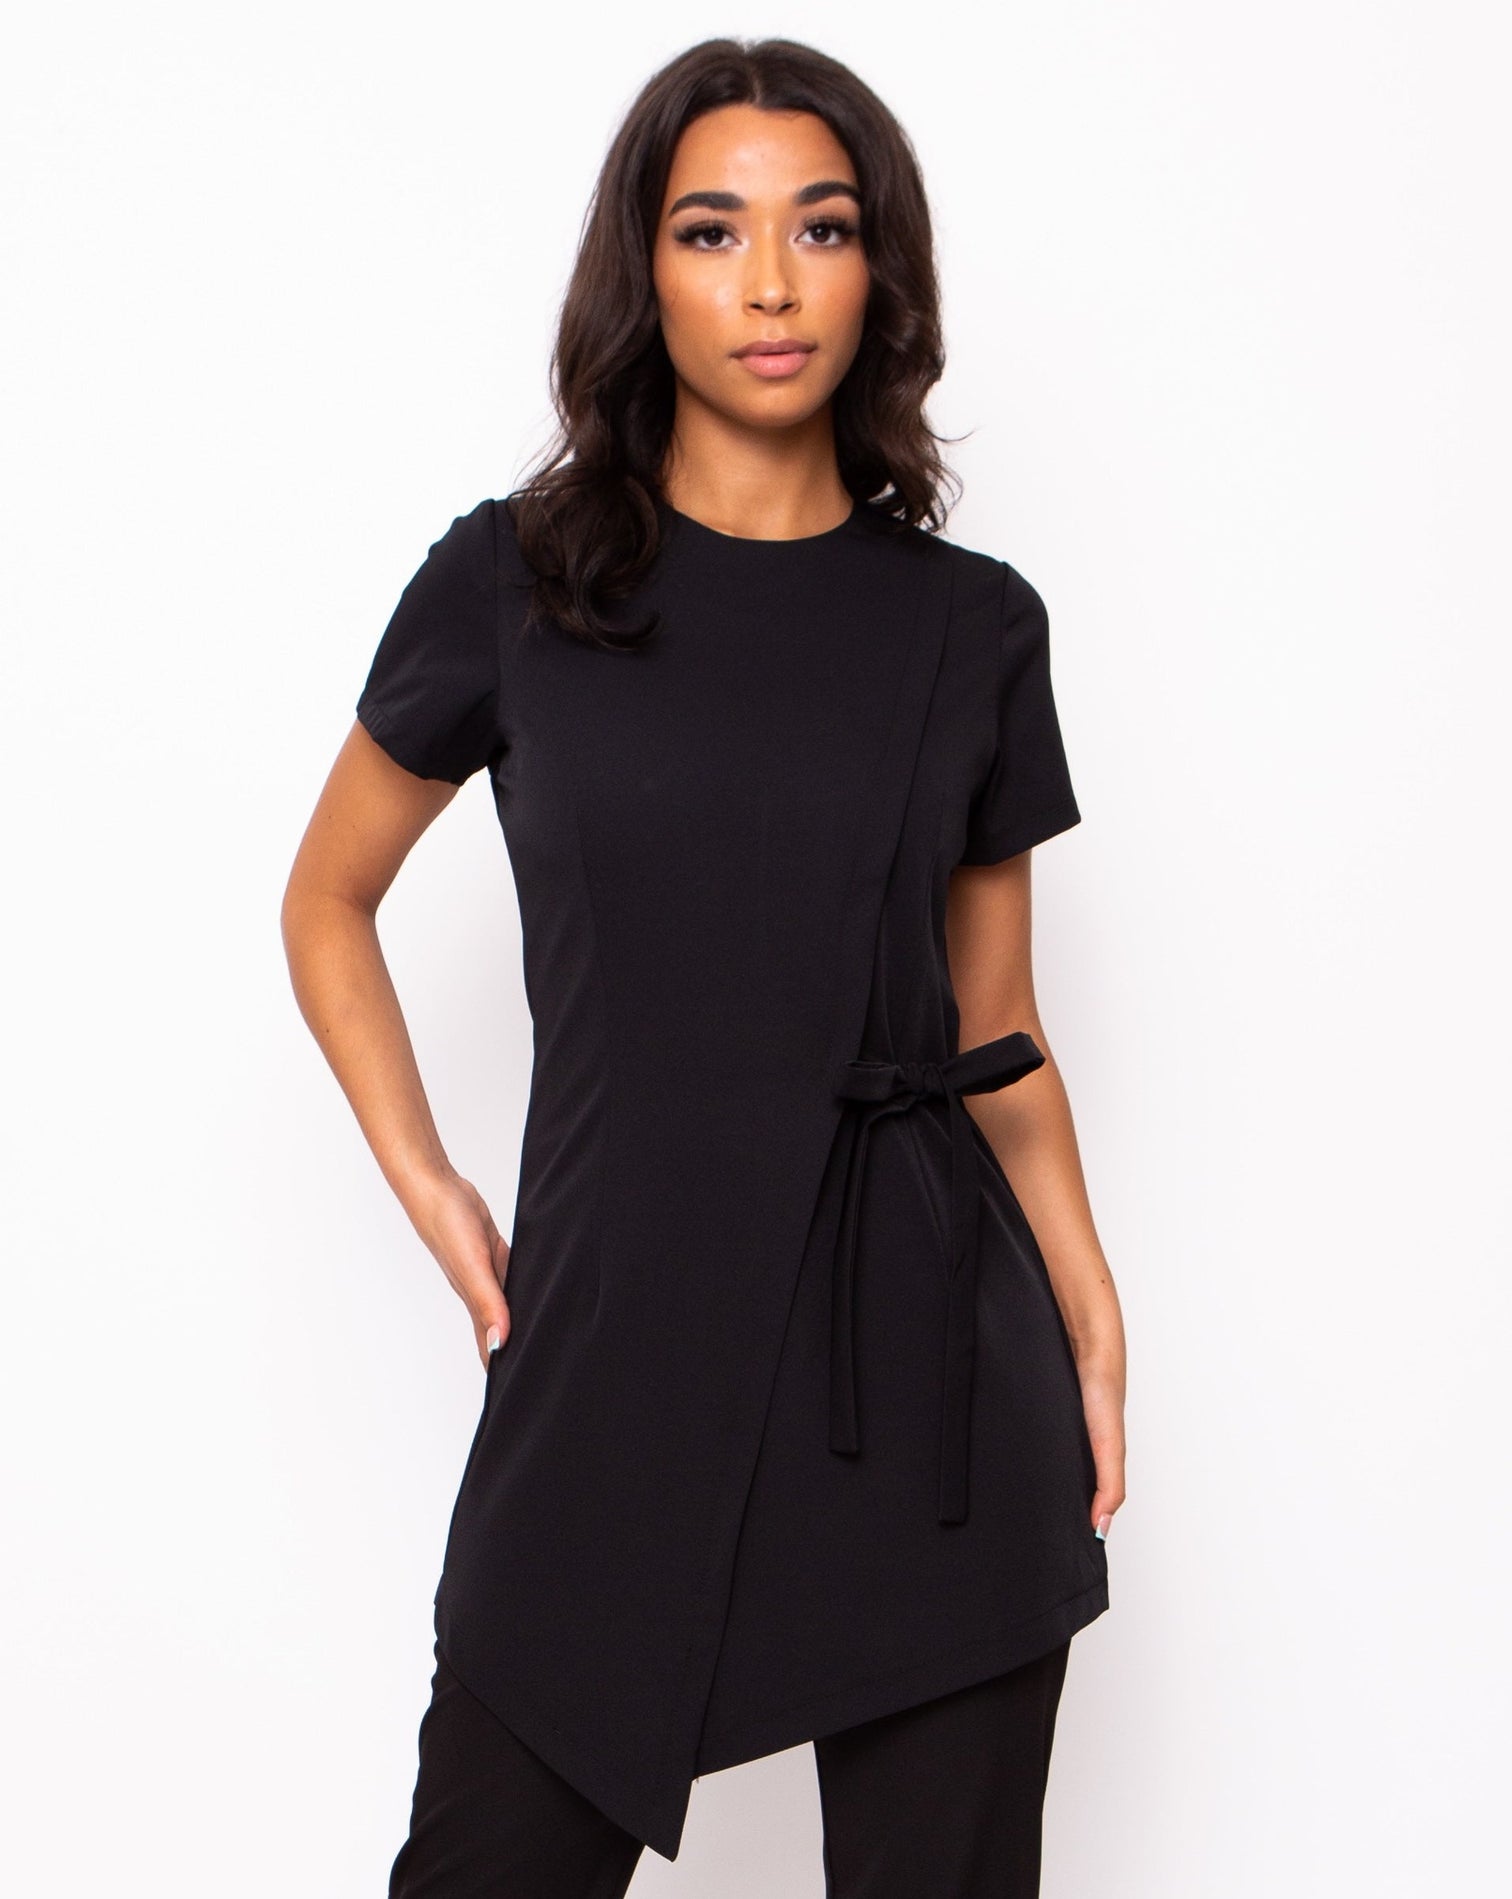 Tunic Tops for Beauty and Hairdressing Salons | Salonwear Direct